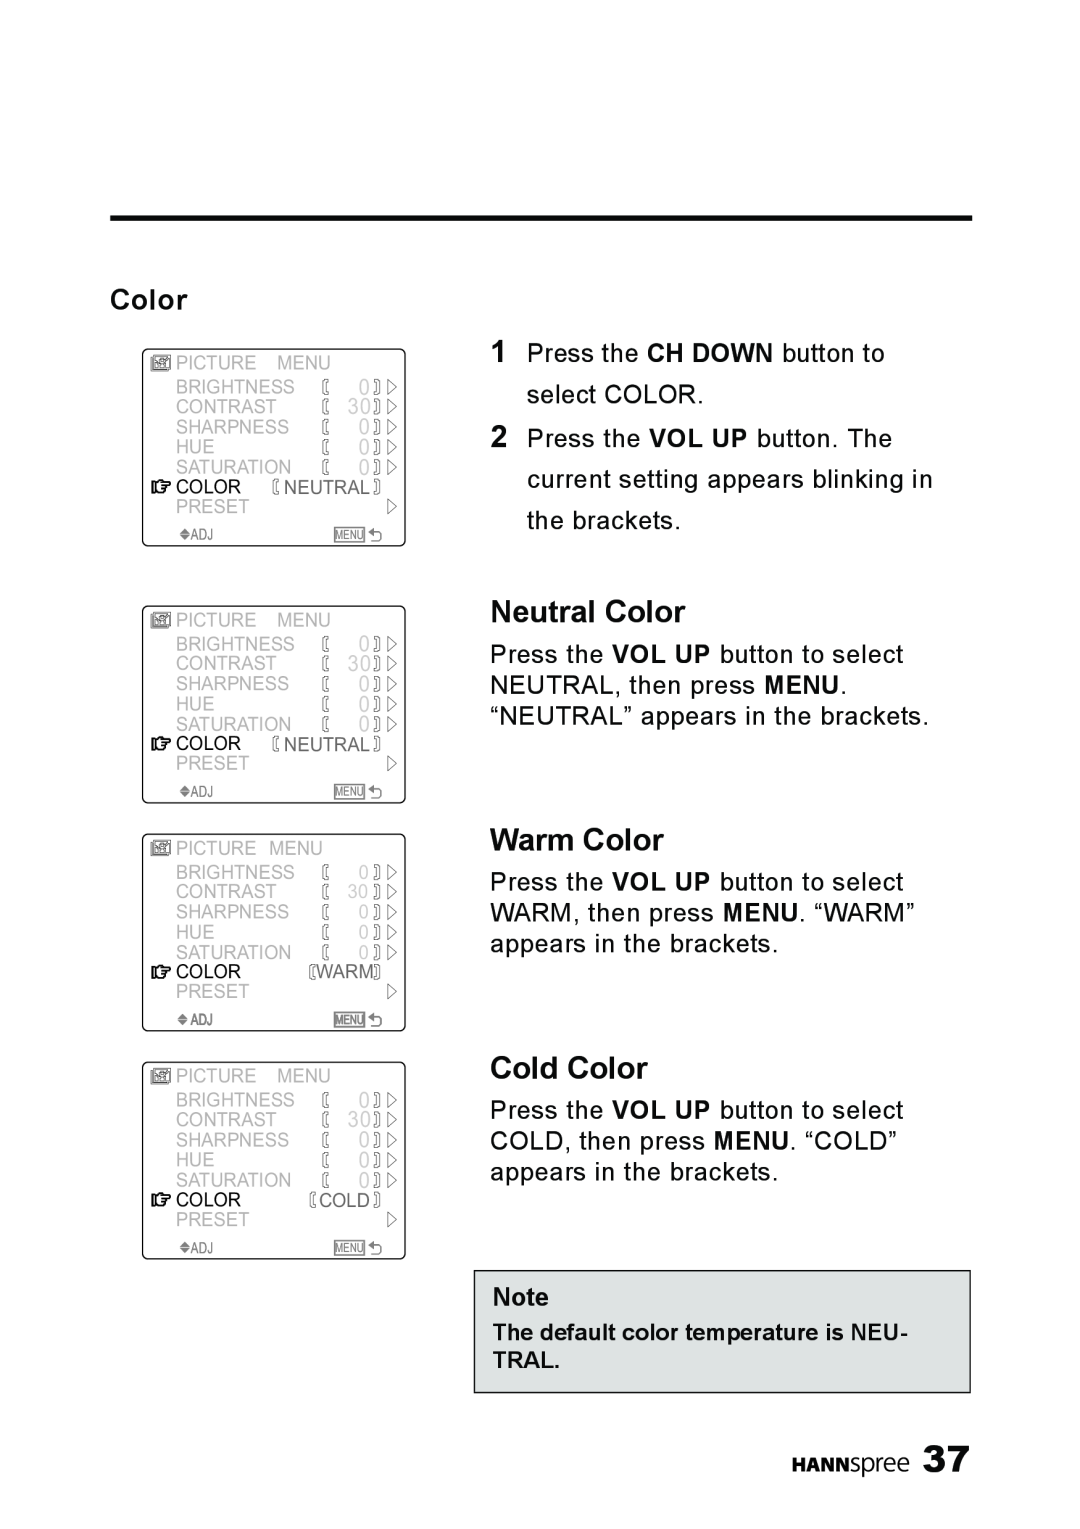 HANNspree ST09-10A1 user manual Neutral Color, Warm Color, Cold Color 